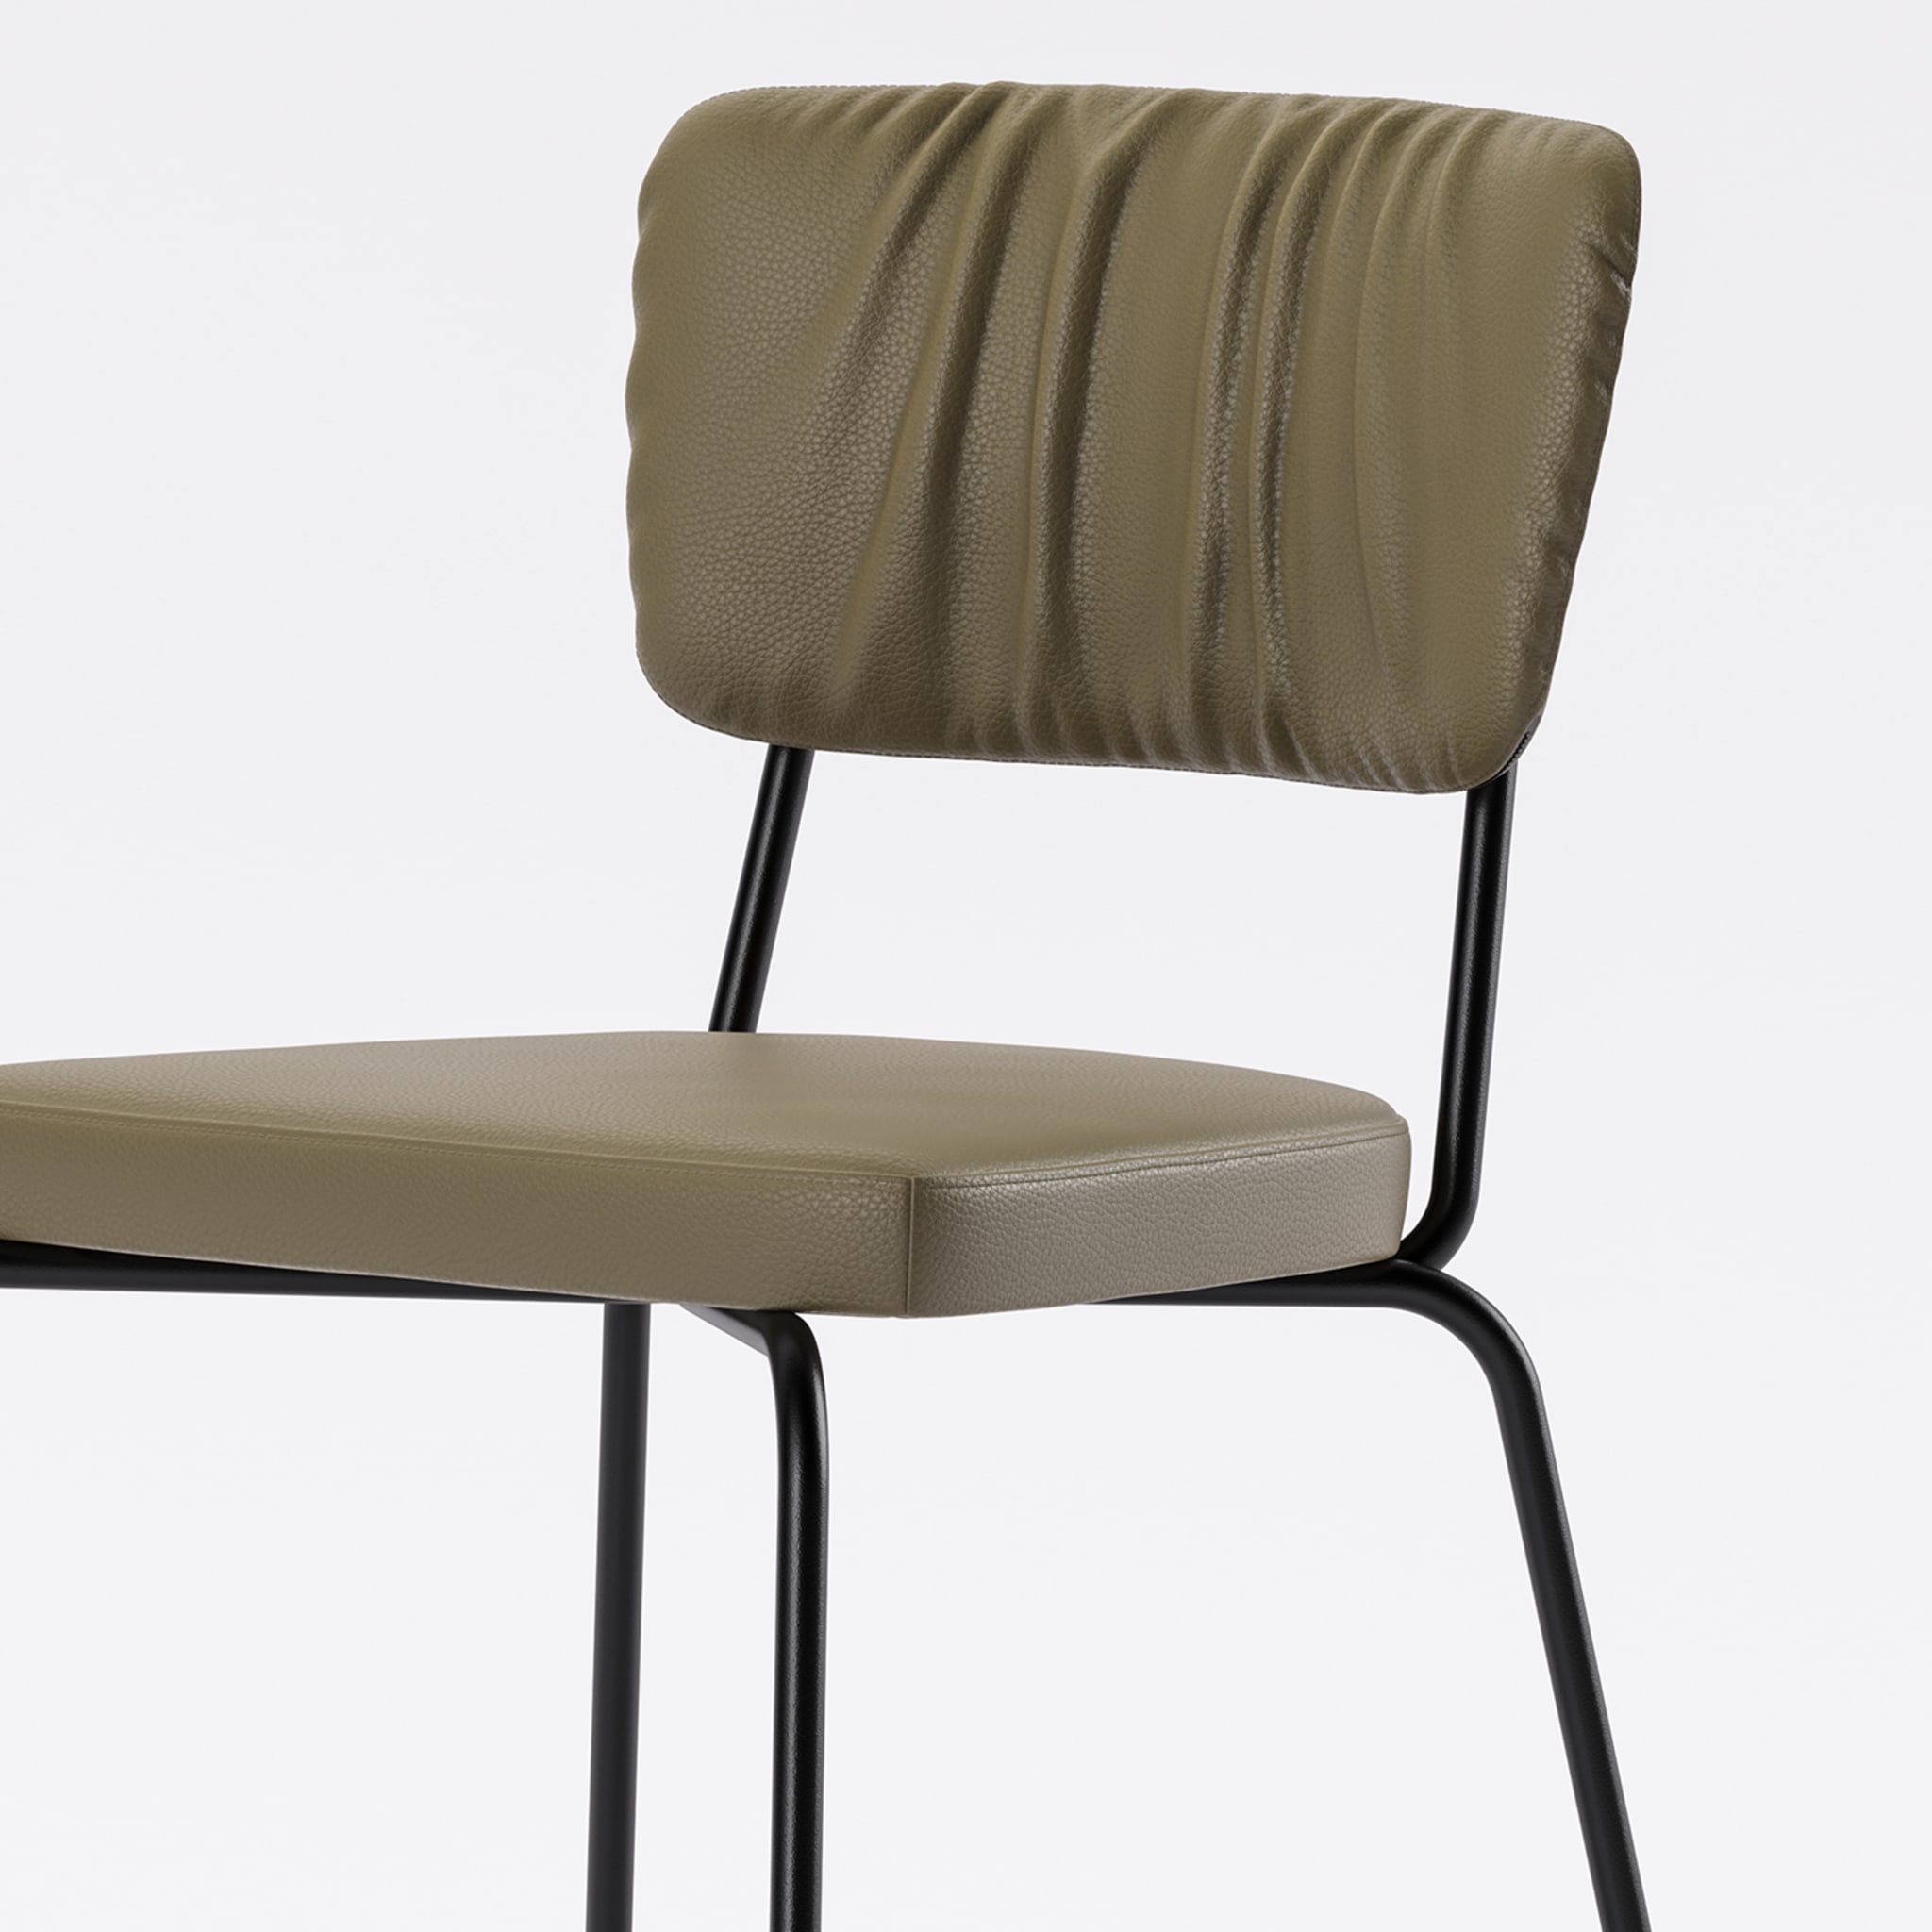 Scala Black Padded Chair by Marco Piva - Alternative view 1